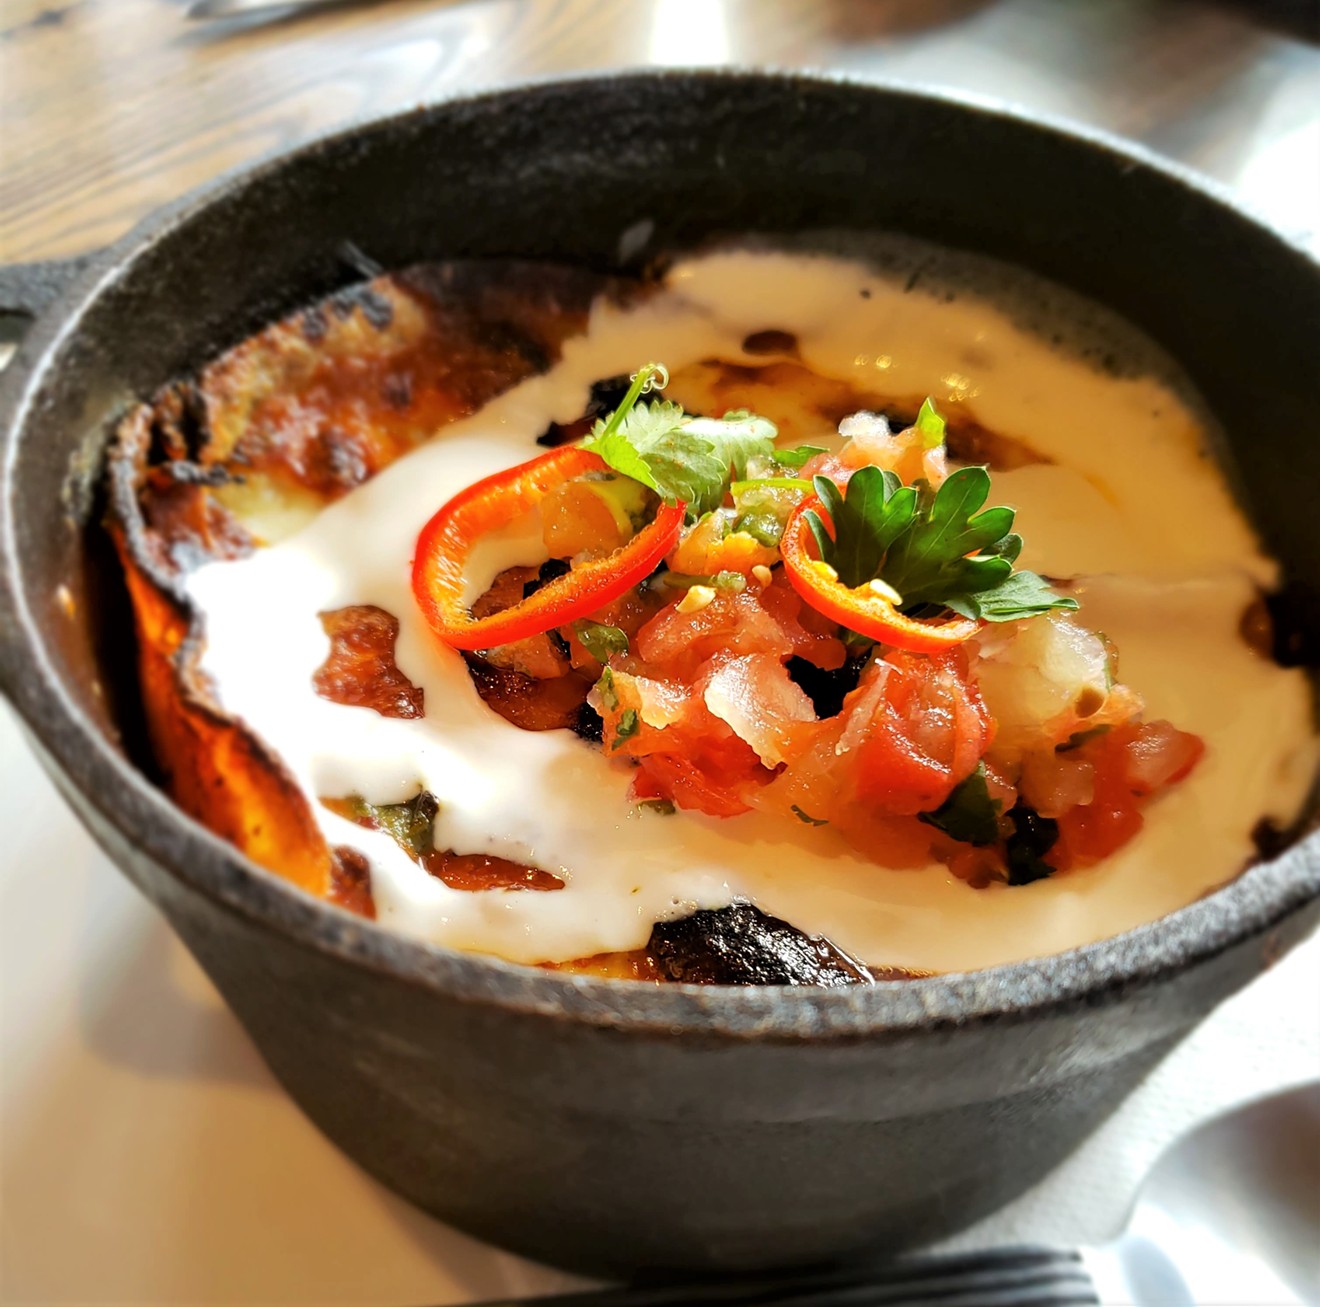 The Ghost Ranch Aztec Cake is layered tortillas, pulled chicken, roasted green chile, sweet corn, and cheese topped with crema and garnish, served in a cast-iron skillet.